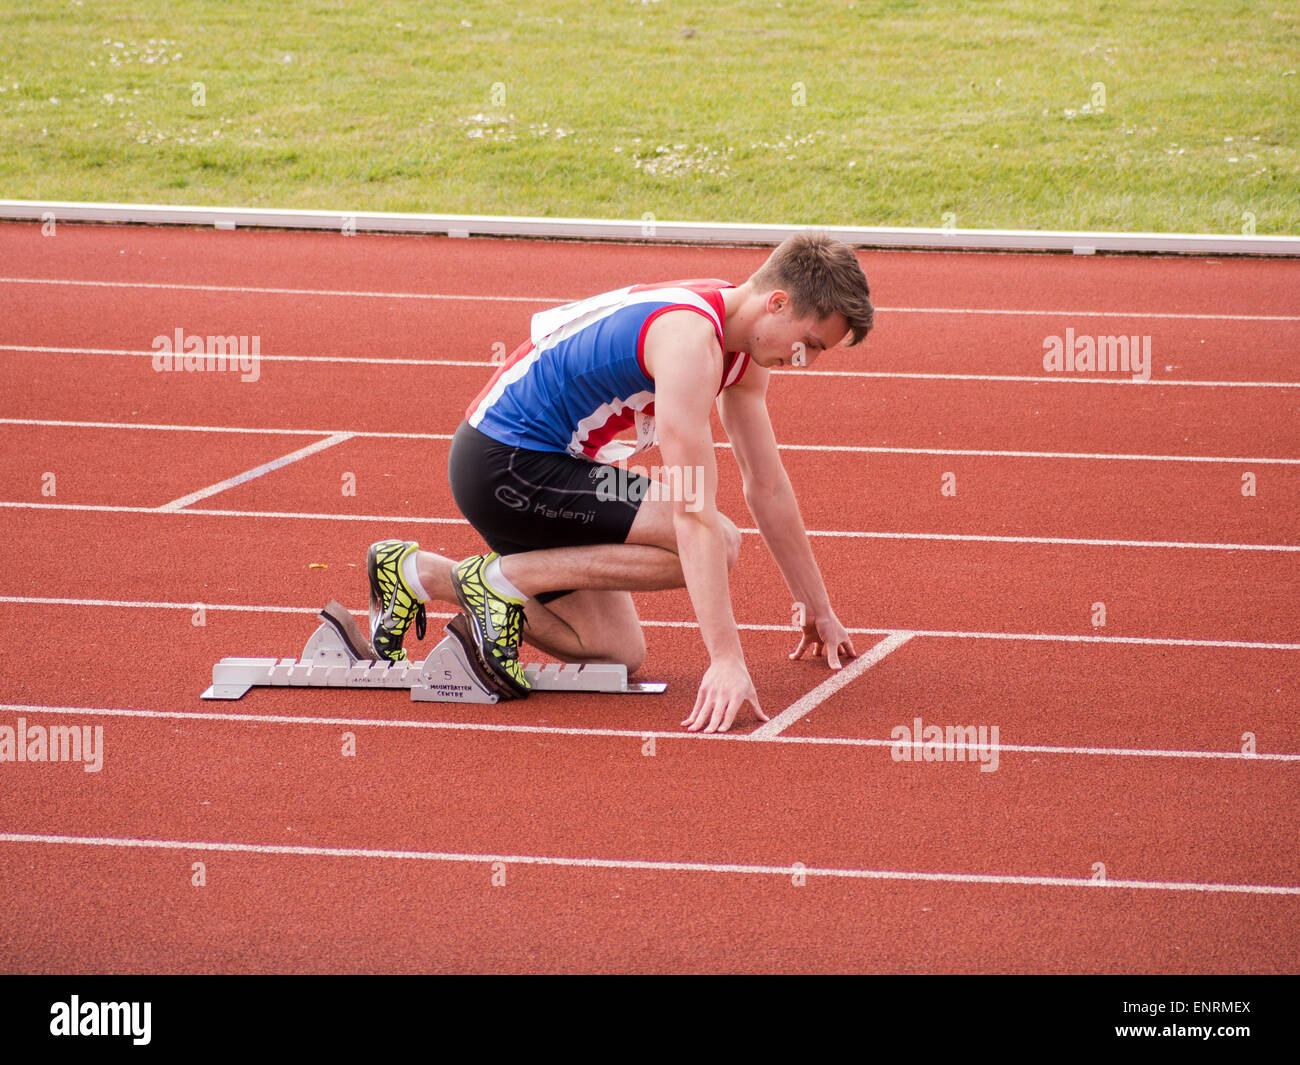 A runner on starting blocks at an athletics track Stock Photo